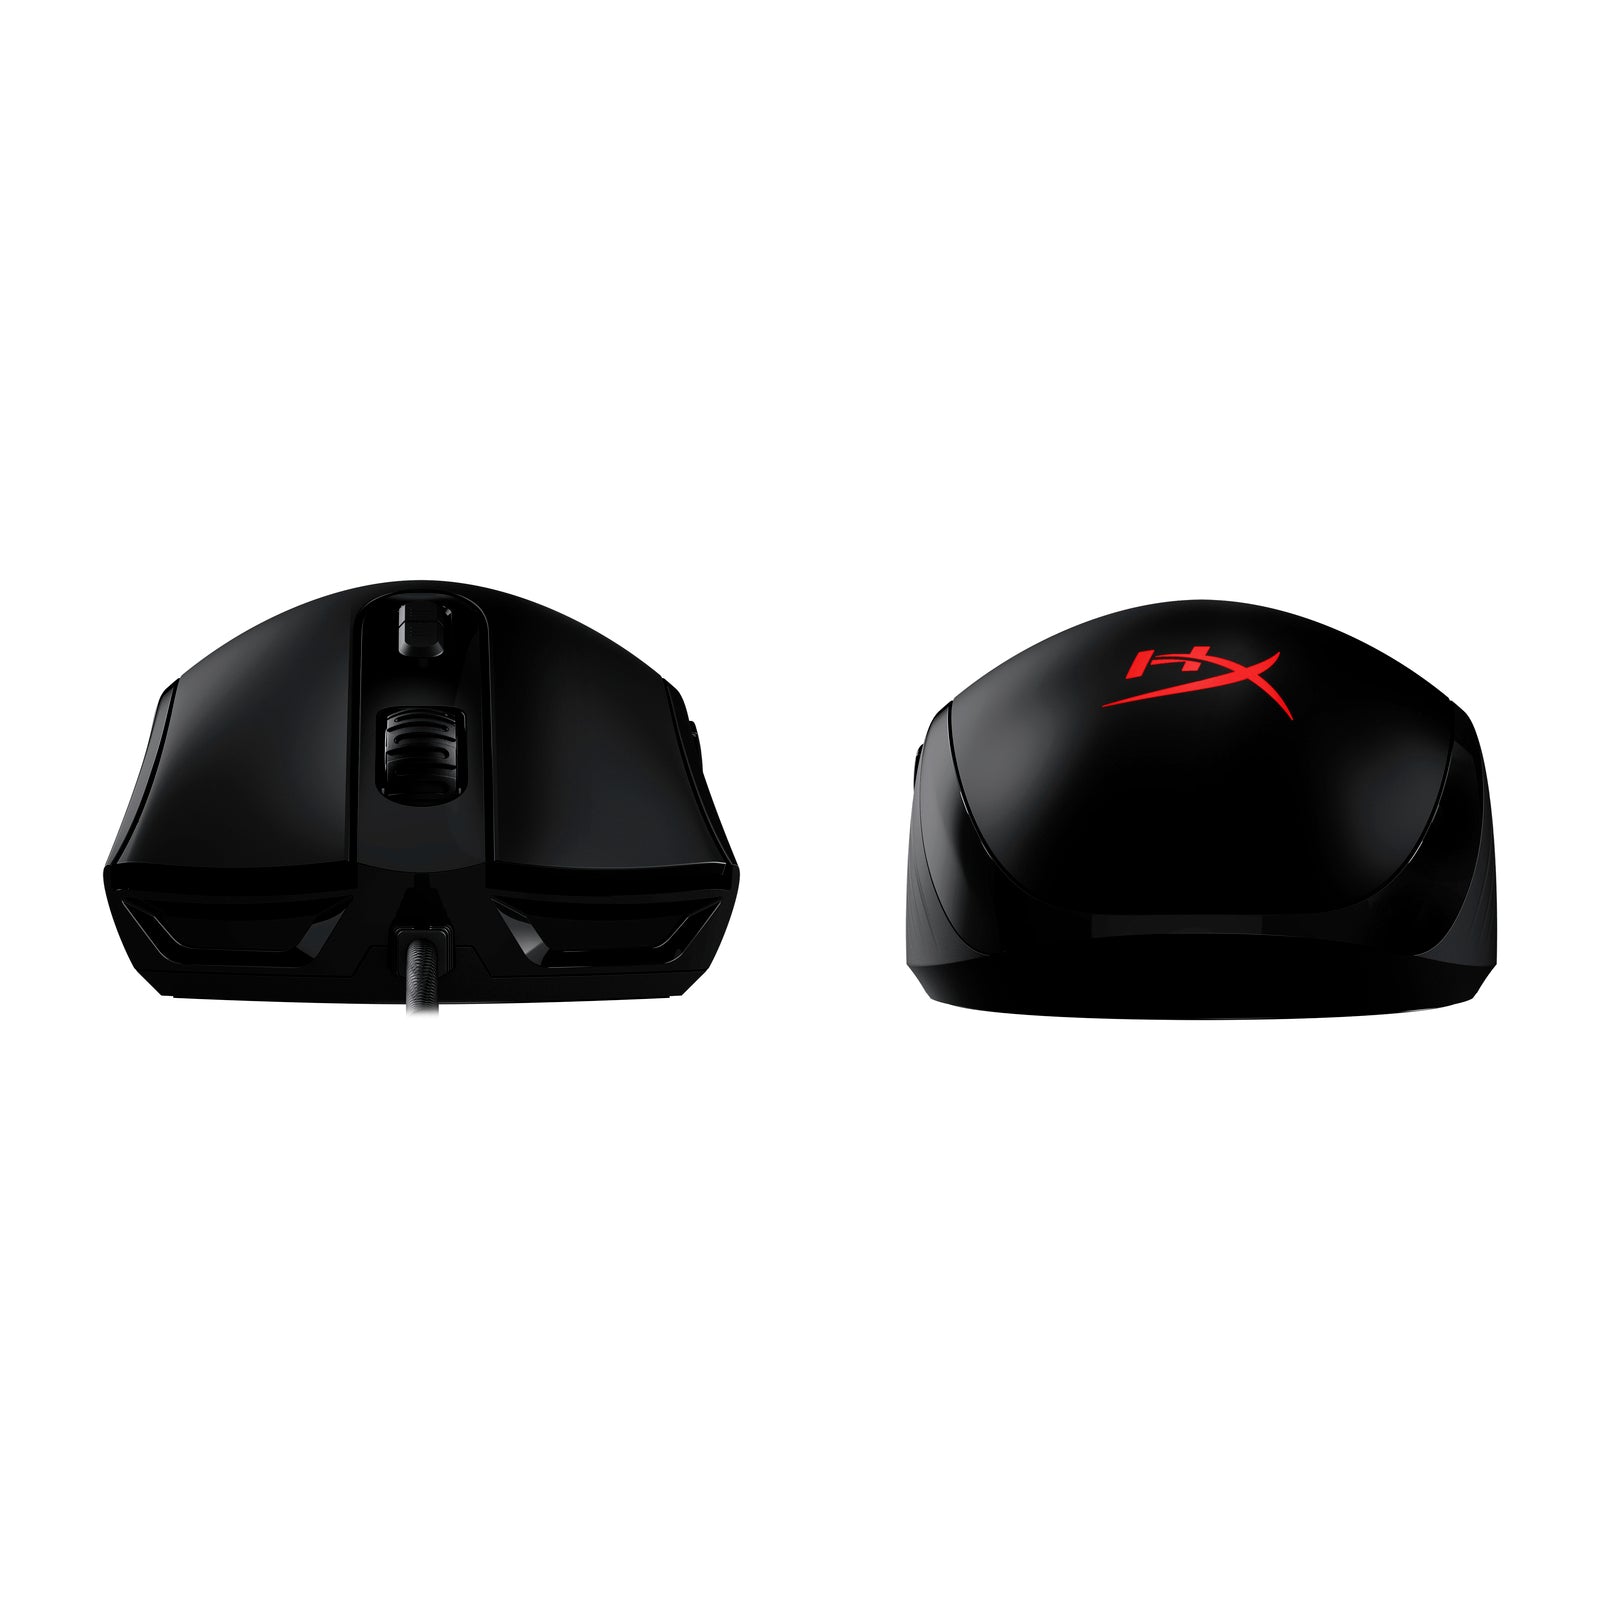 Pulsefire Core - RGB Gaming Mouse | HyperX